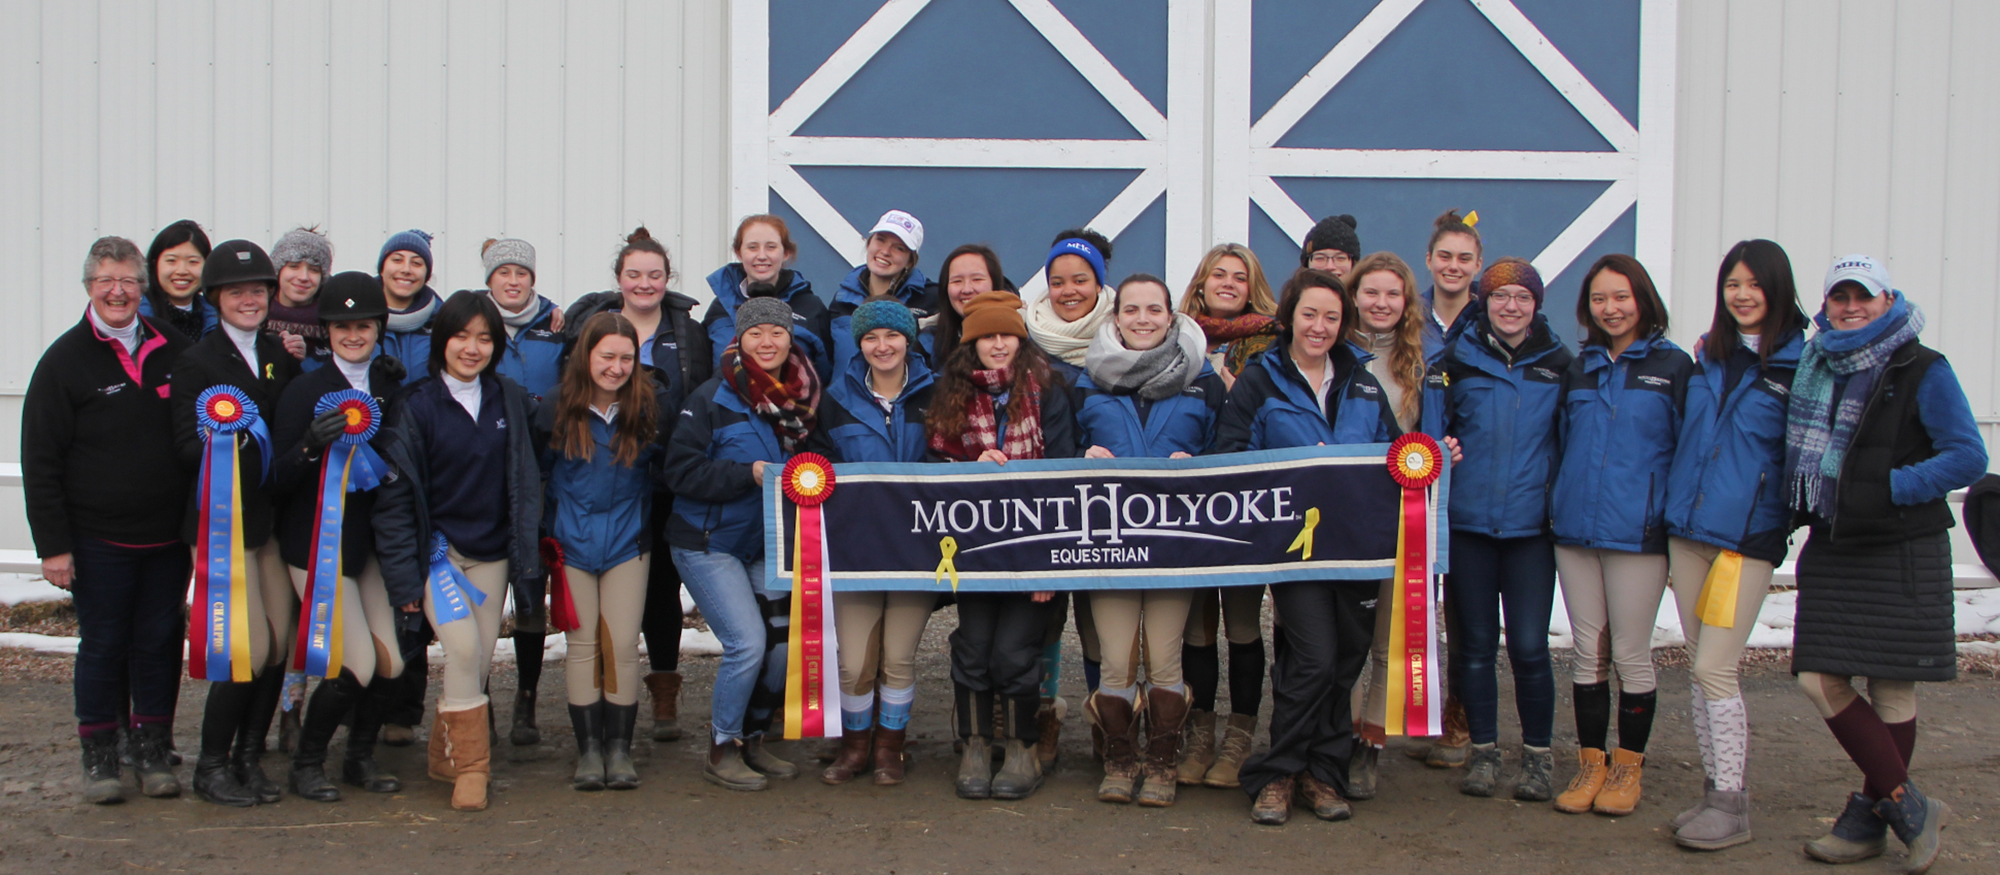 Group photo of the Lyons equestrian team, following their second-place finish at the 2019 Smith College Show on Feb. 23rd.